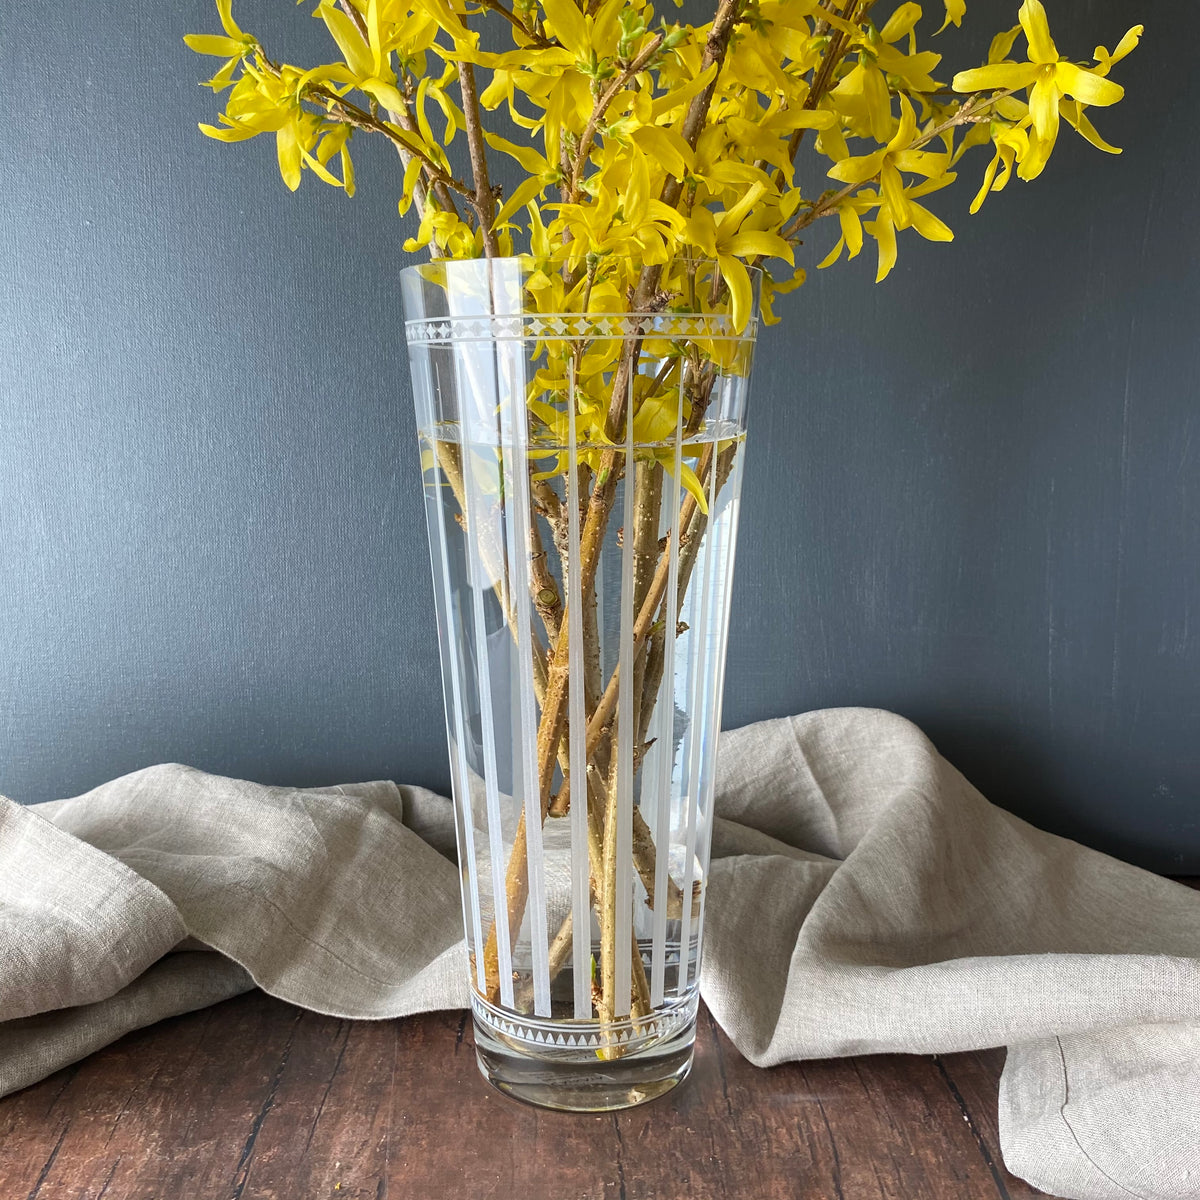 A Marrakech Glass Vase with yellow flowers in graphic patterns by Caskata.